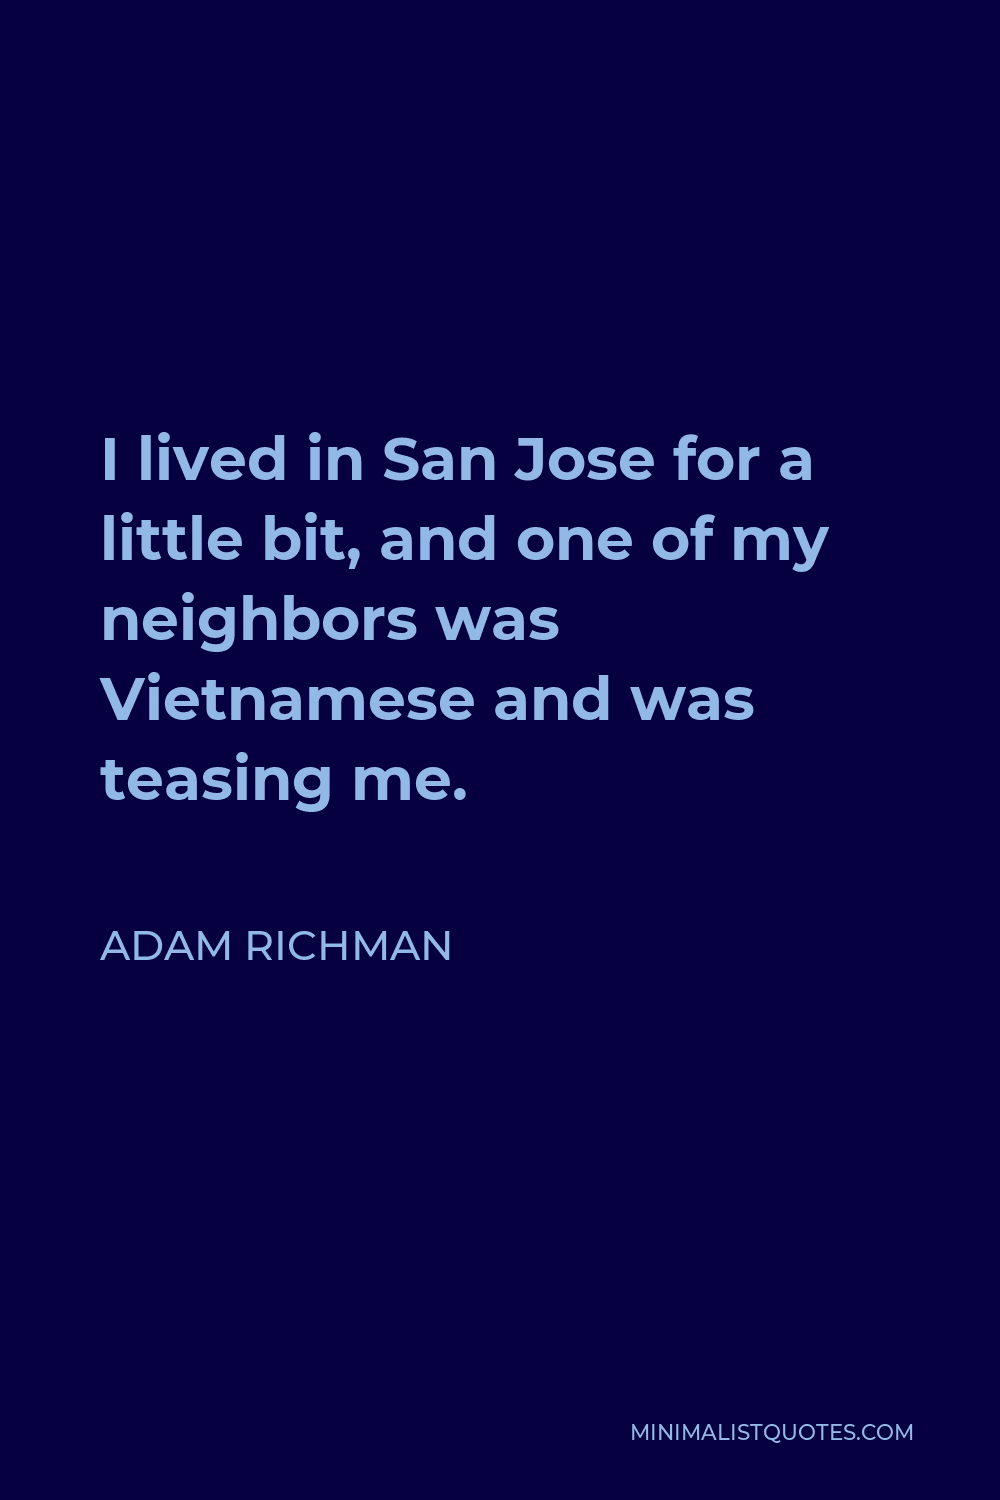 Adam Richman Quote - I lived in San Jose for a little bit, and one of my neighbors was Vietnamese and was teasing me.